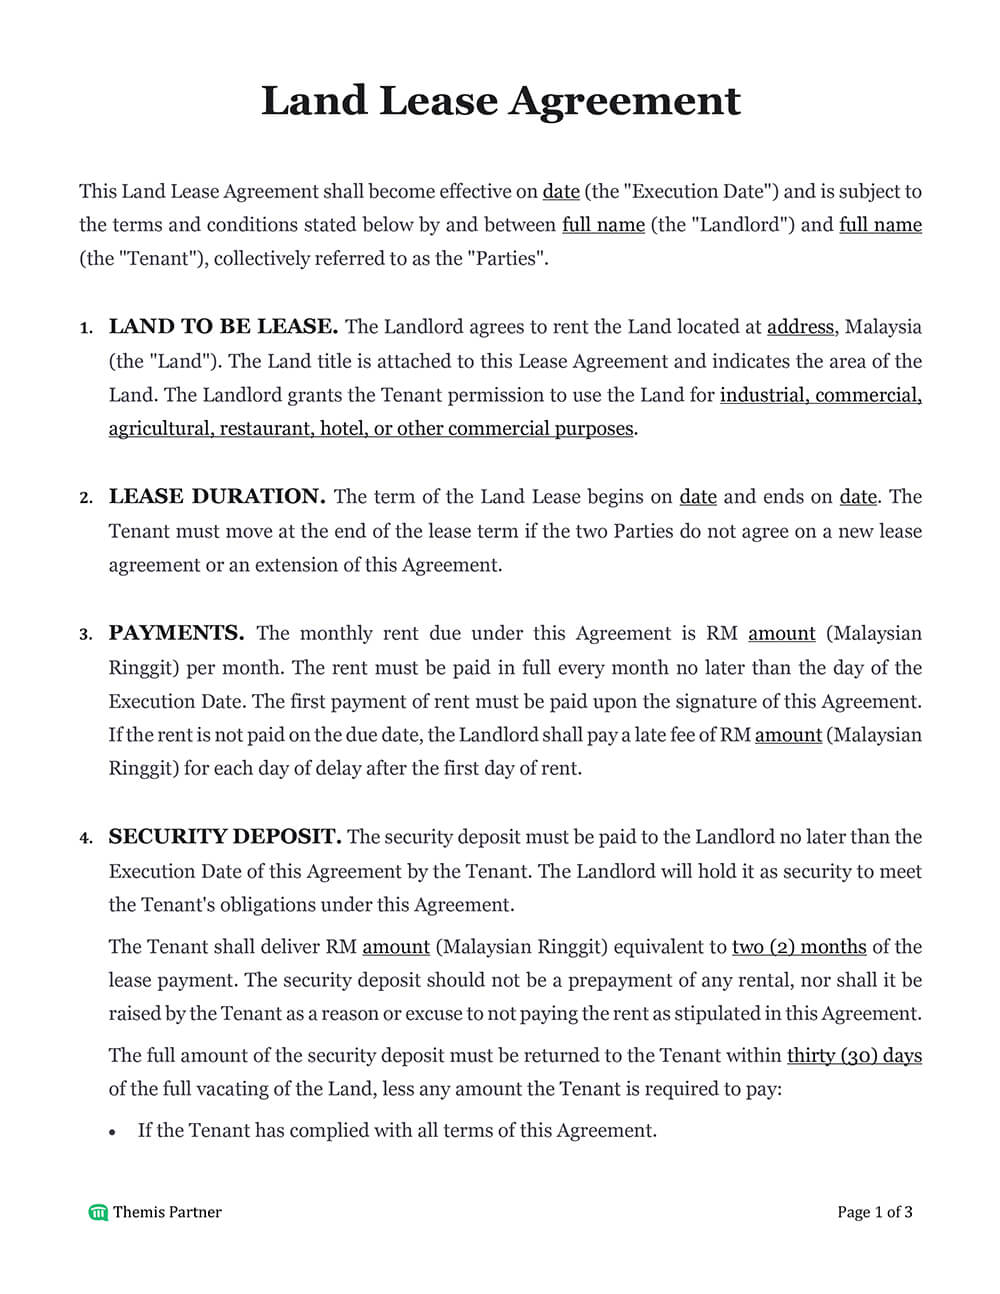 Land lease agreement template